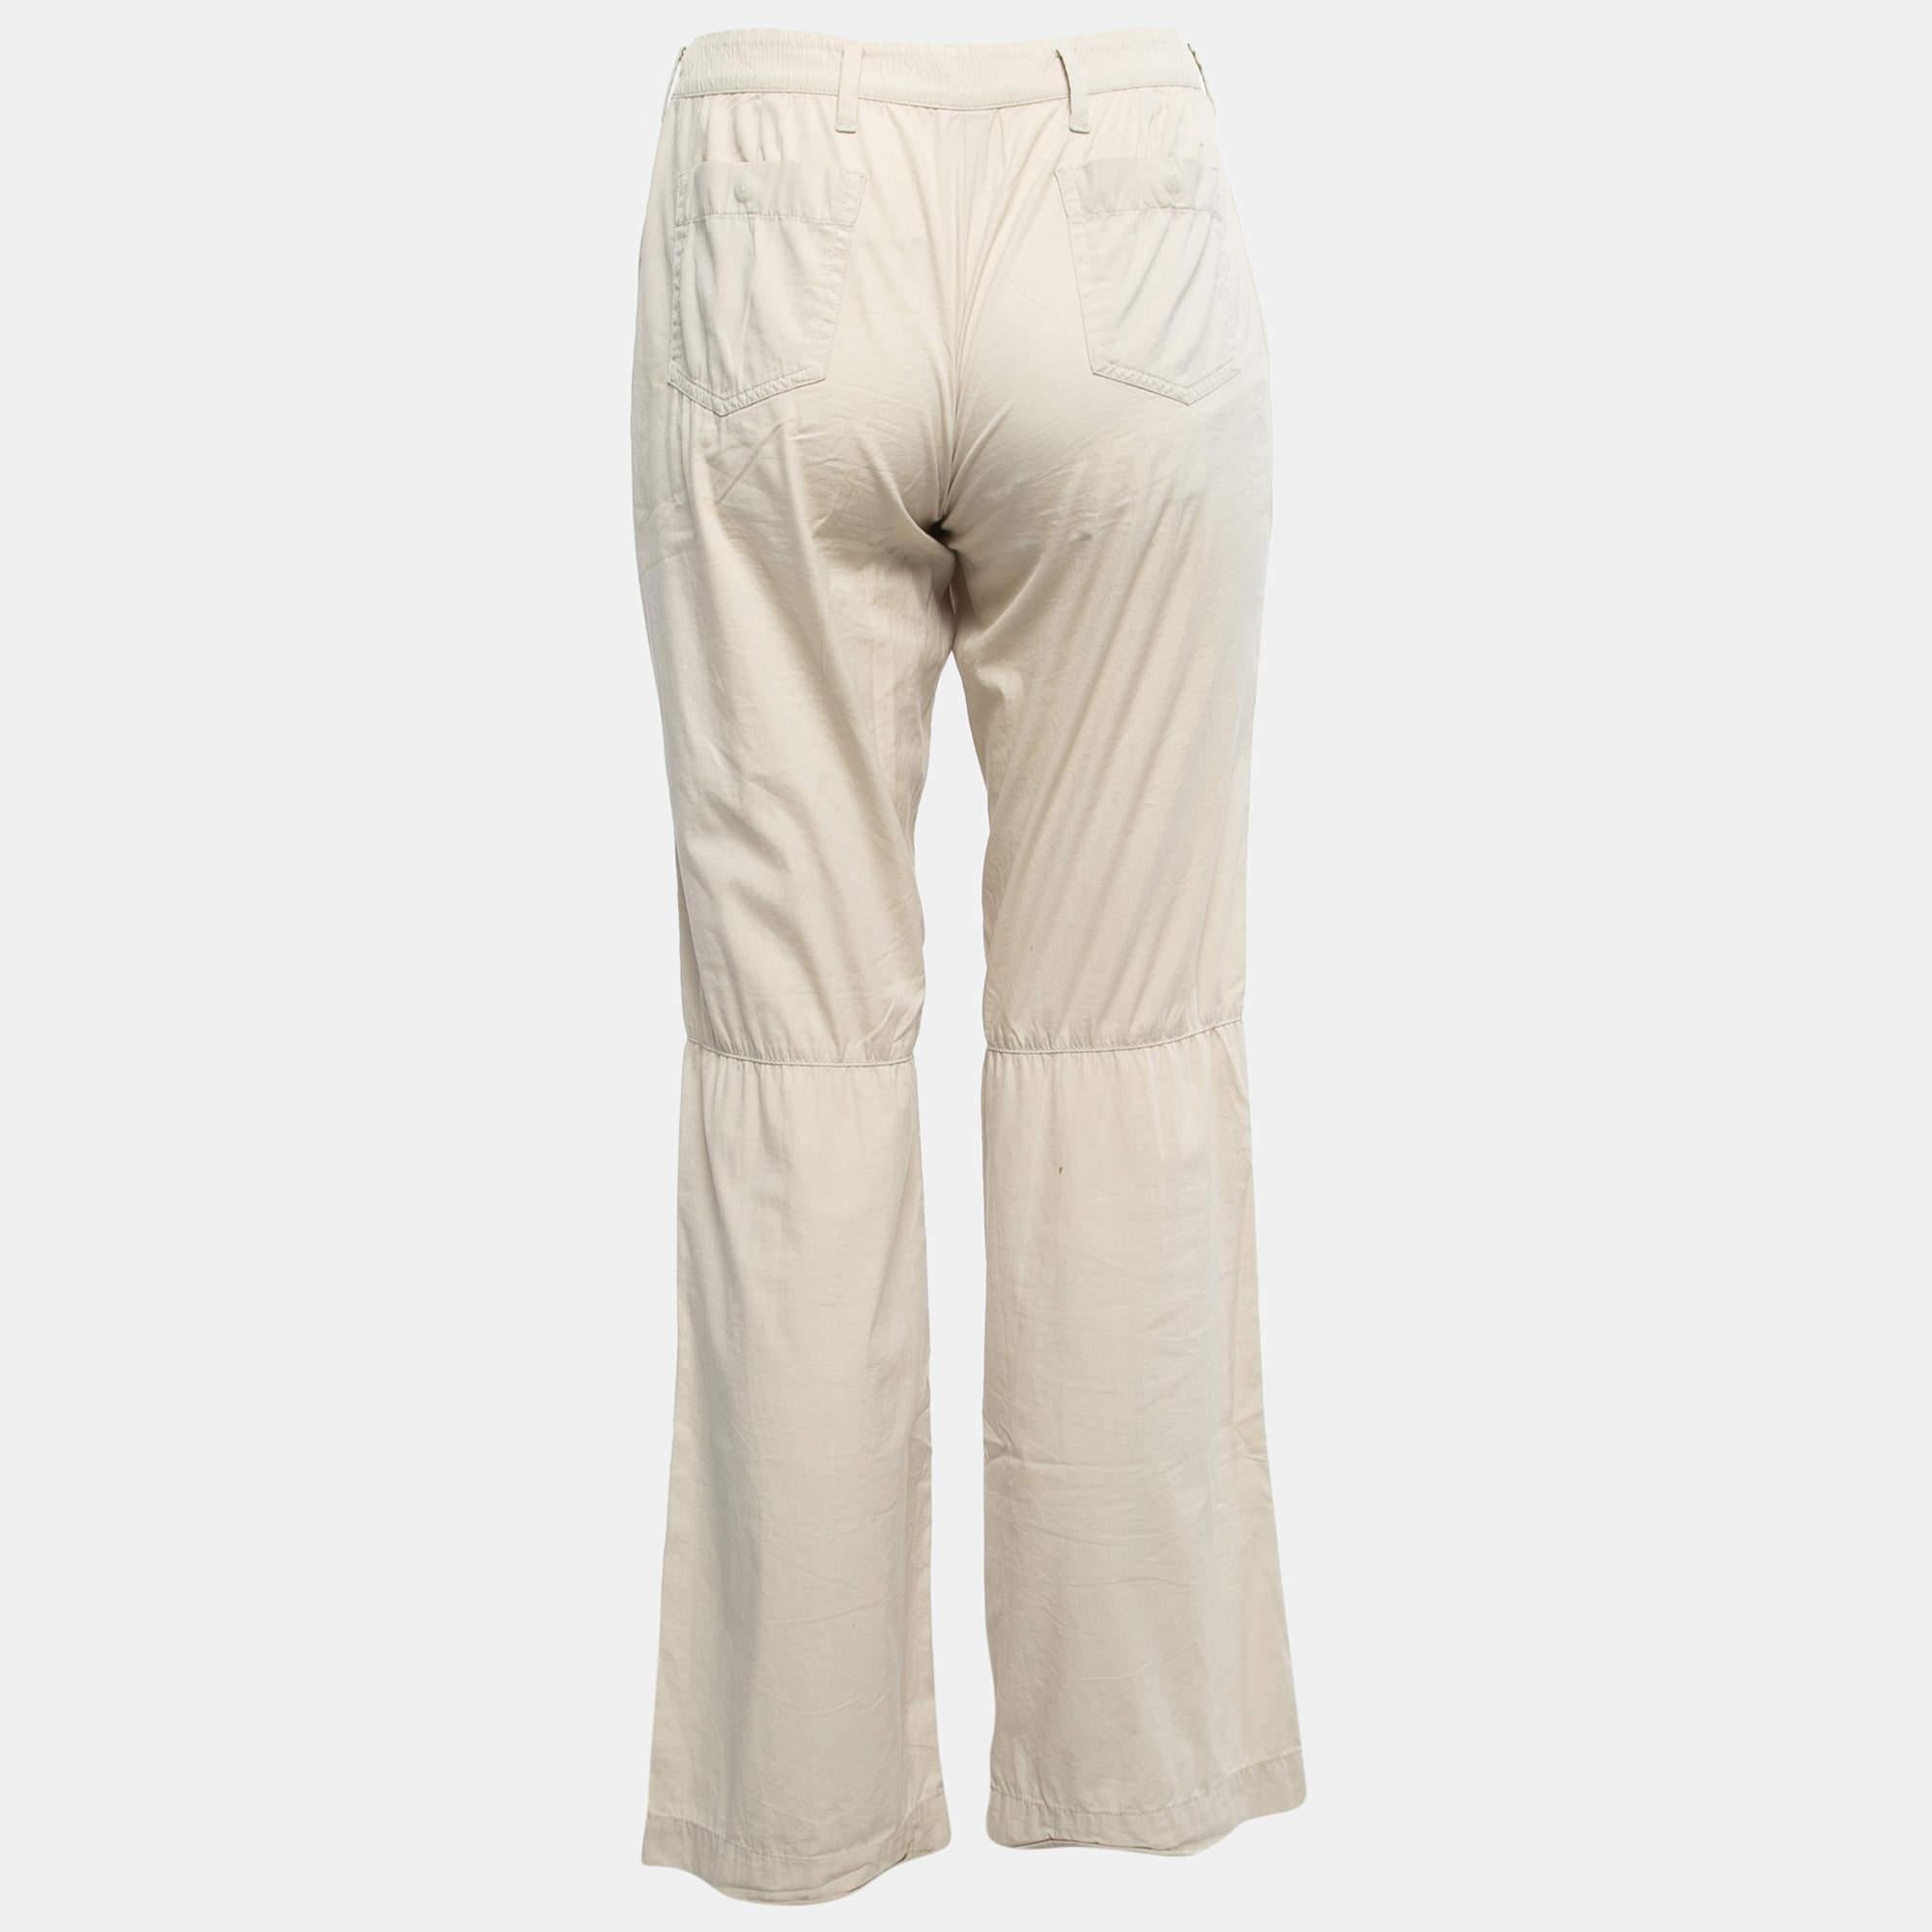 Experience the perfect fusion of comfort and sophistication with these Prada women's trousers. Meticulously designed, they exude versatility and elegance, ensuring you look and feel confident throughout your day.

